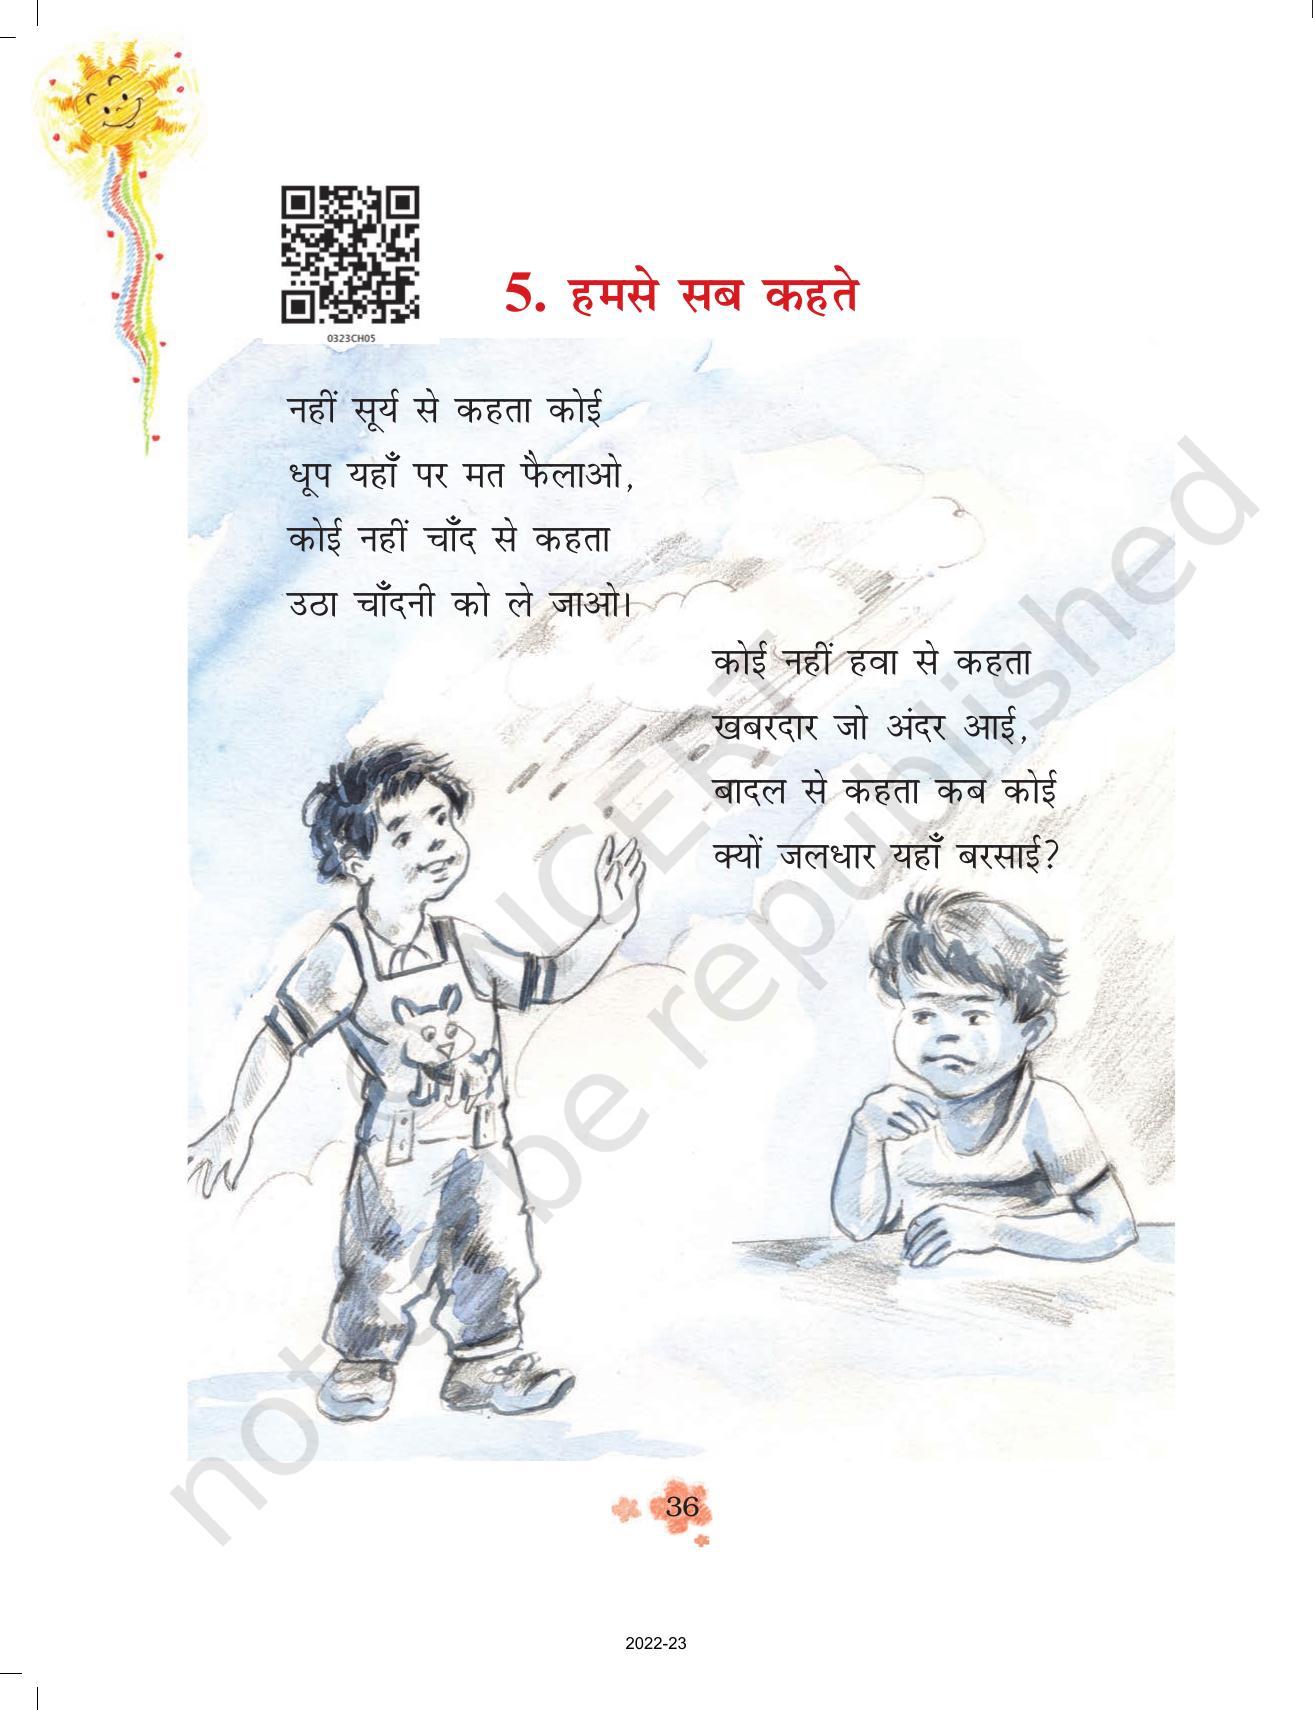 NCERT Book for Class 3 Hindi Chapter 5-हमसे सब कहते - Page 1